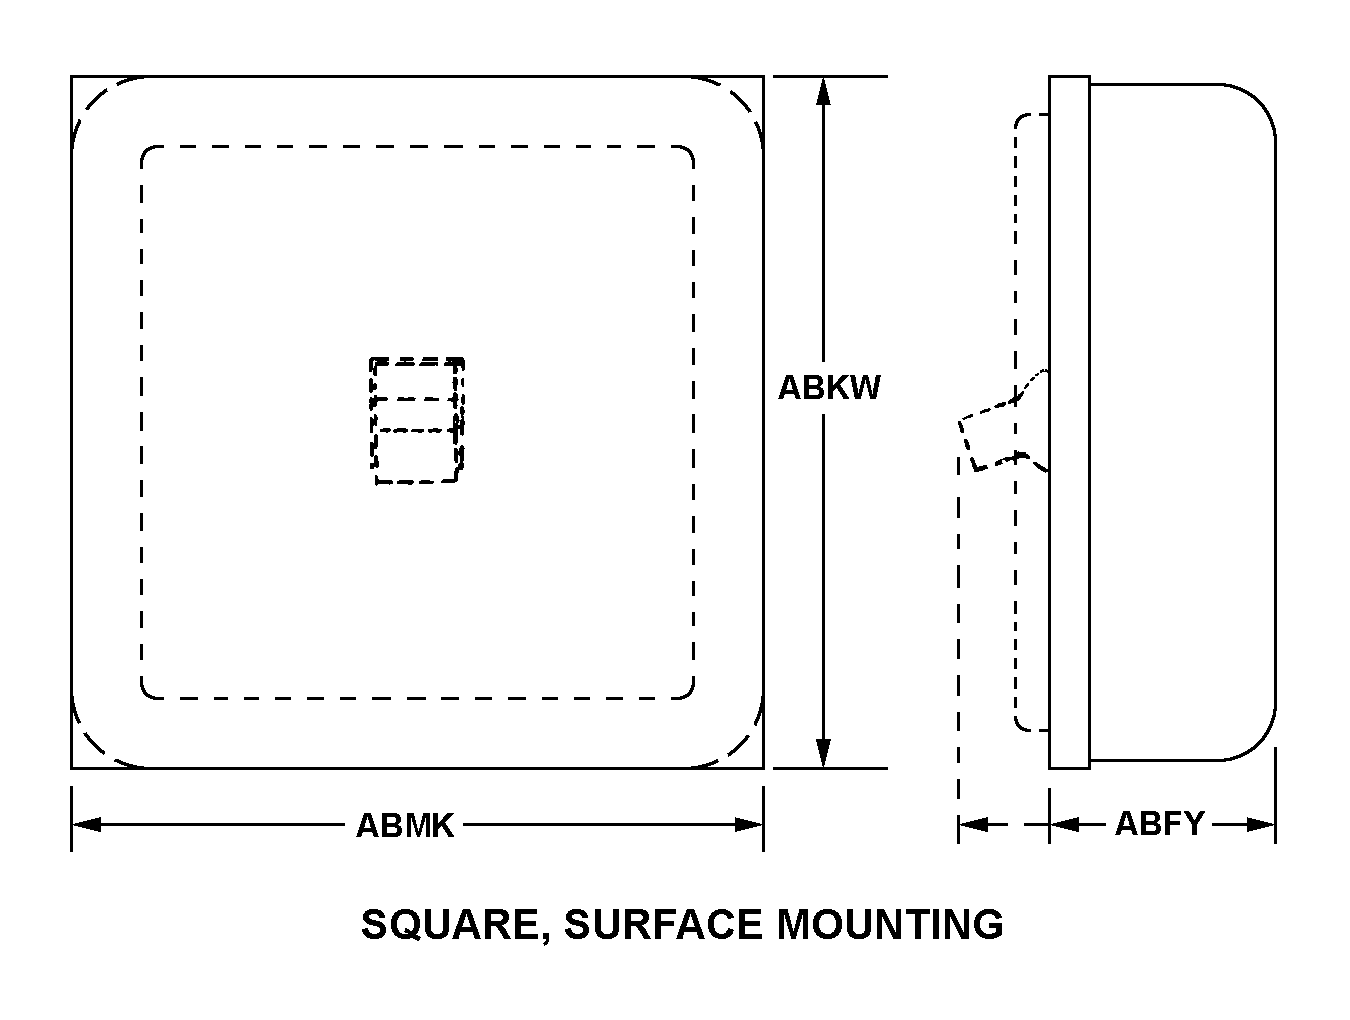 SQUARE, SURFACE MOUNTING style nsn 5925-01-545-5960